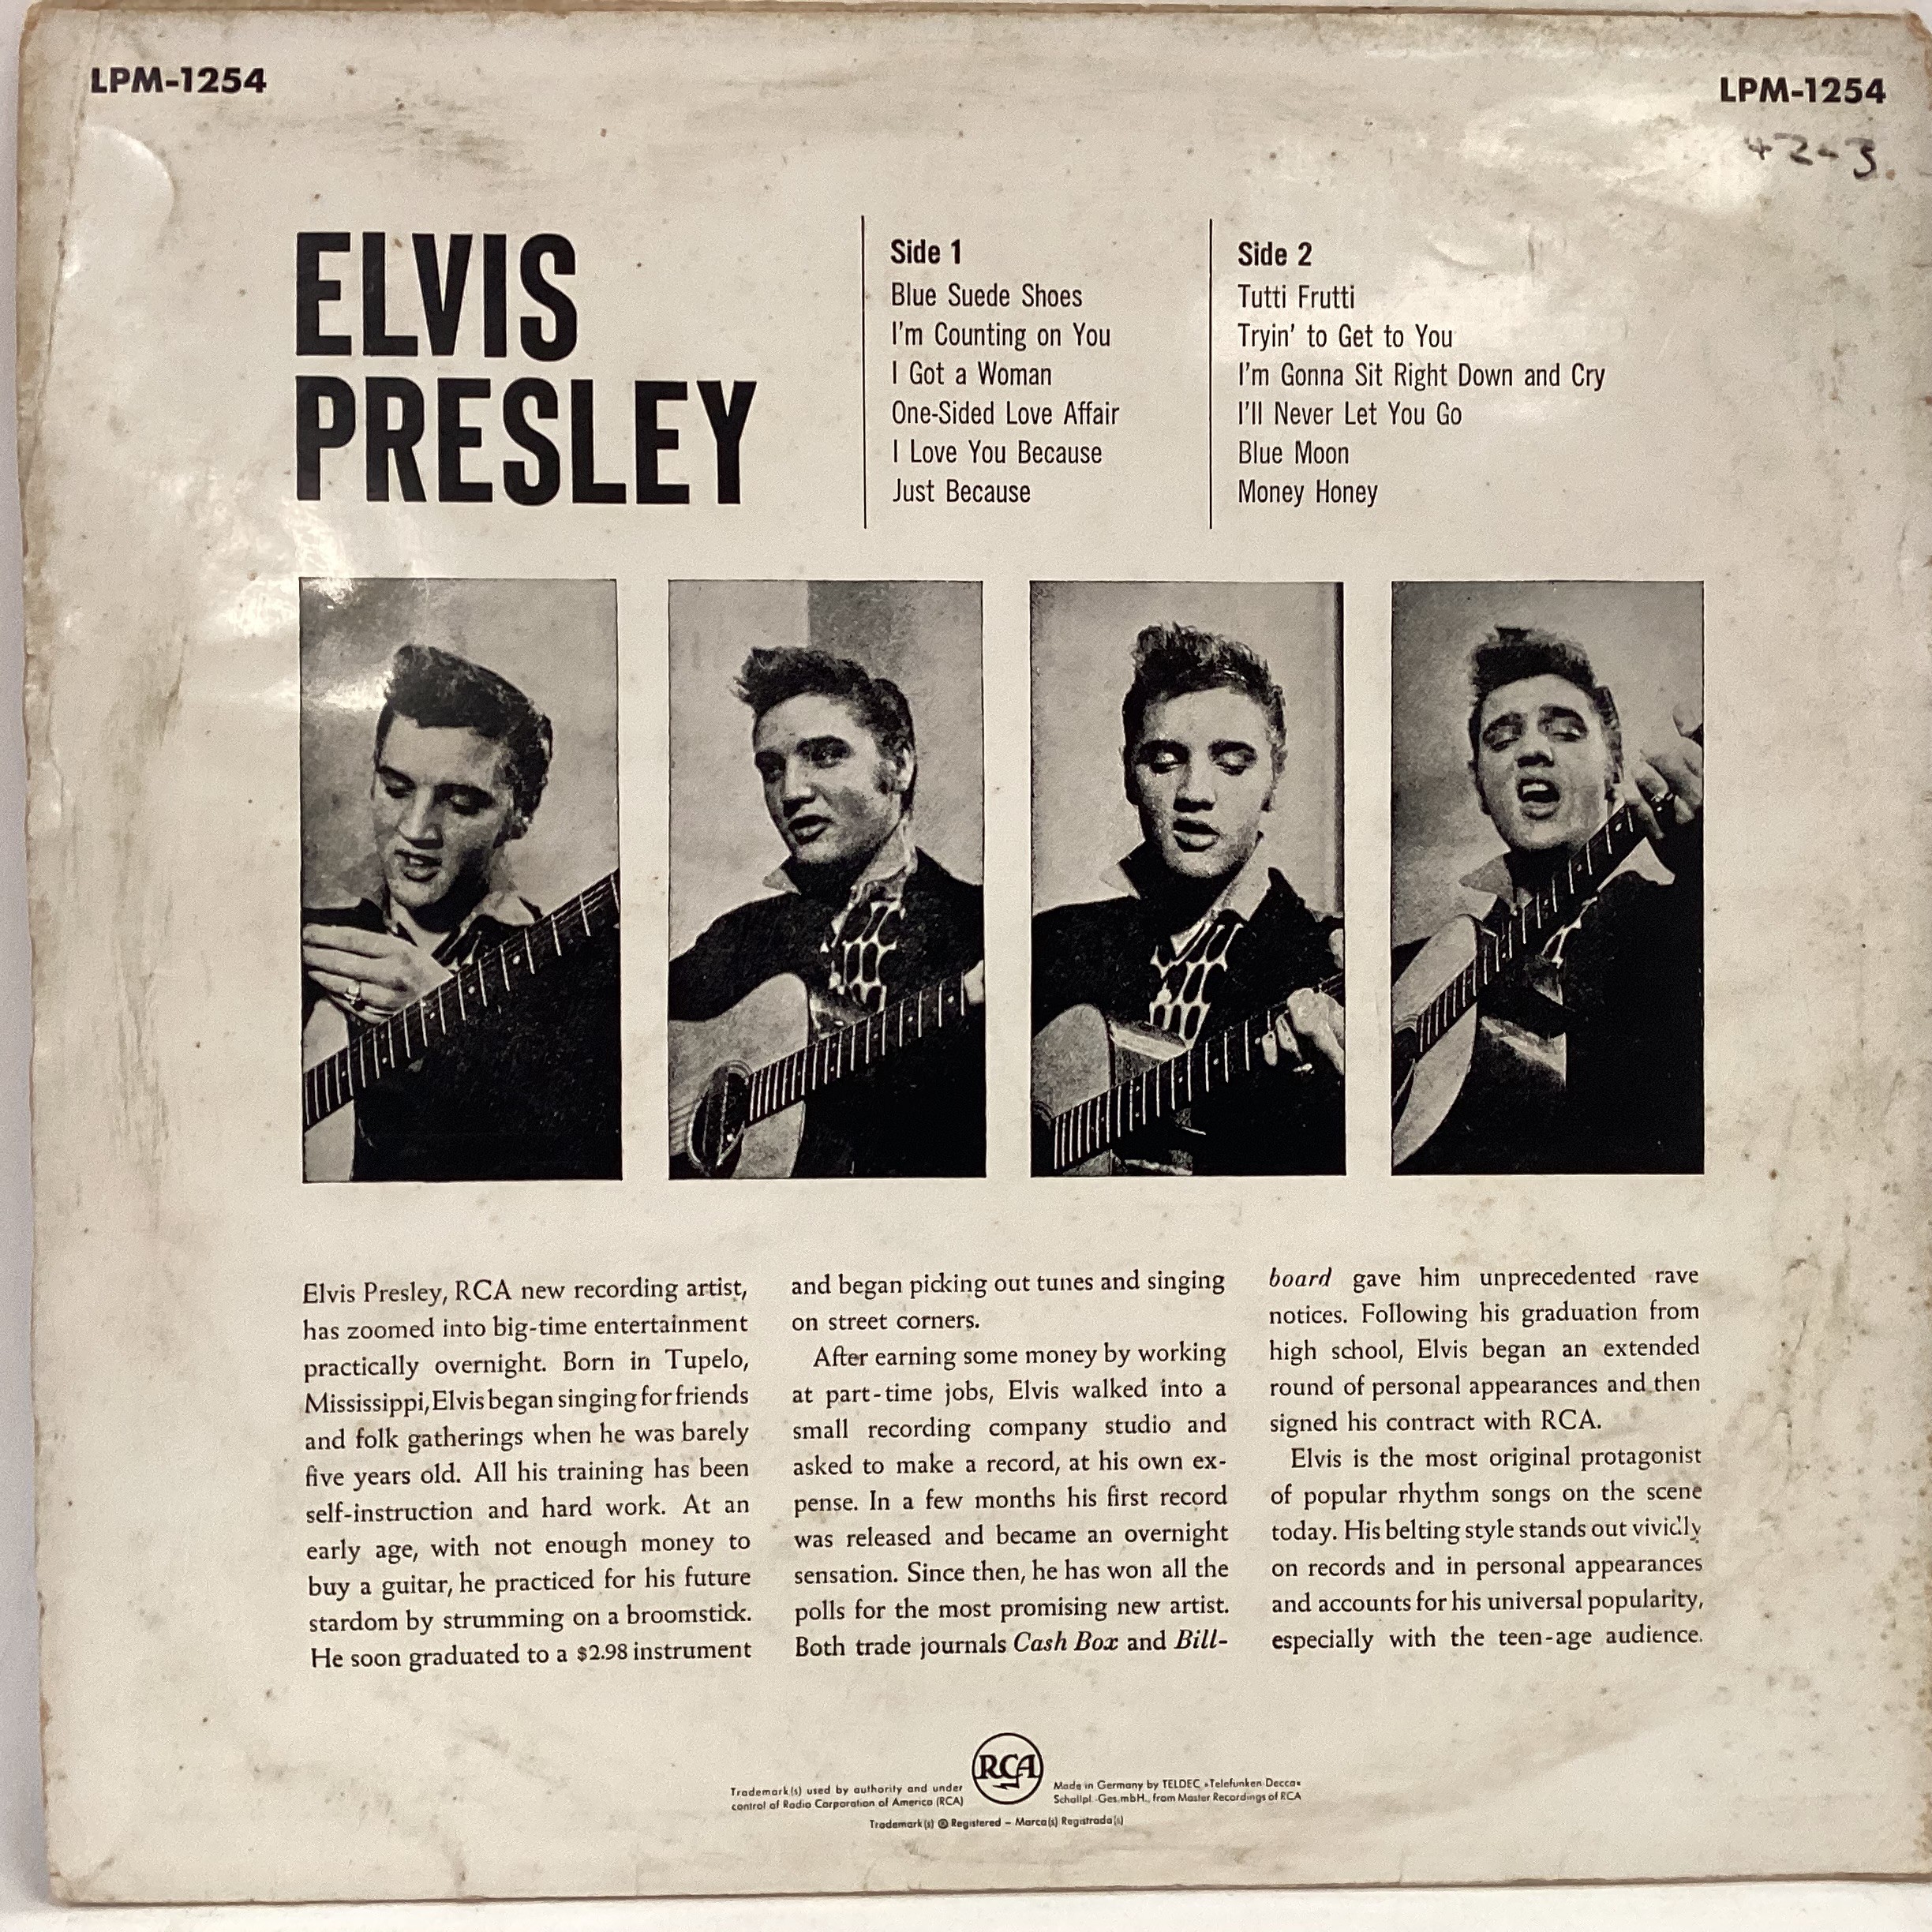 ELVIS PRESLEY DEBUT ALBUM ORIGINAL LONG PLAYER. This is a German pressing on RCA LPM 1254 found here - Image 2 of 4